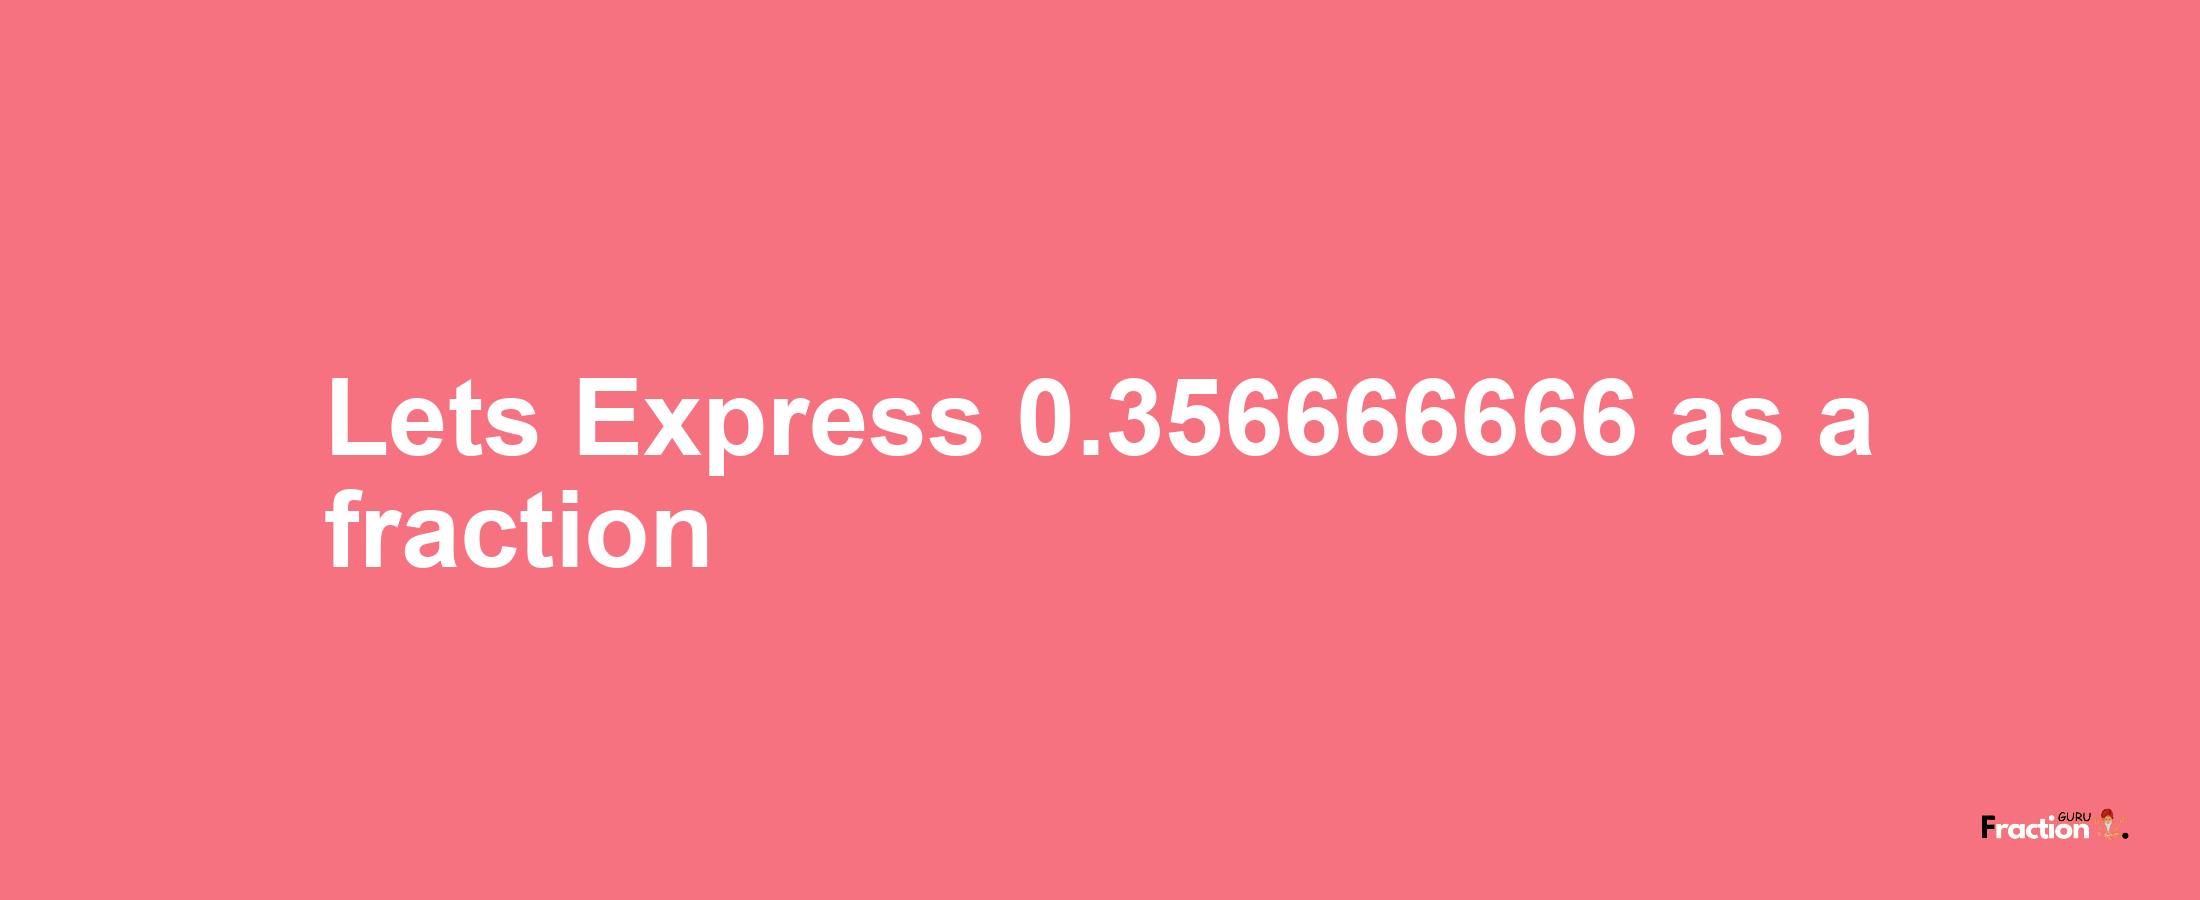 Lets Express 0.356666666 as afraction